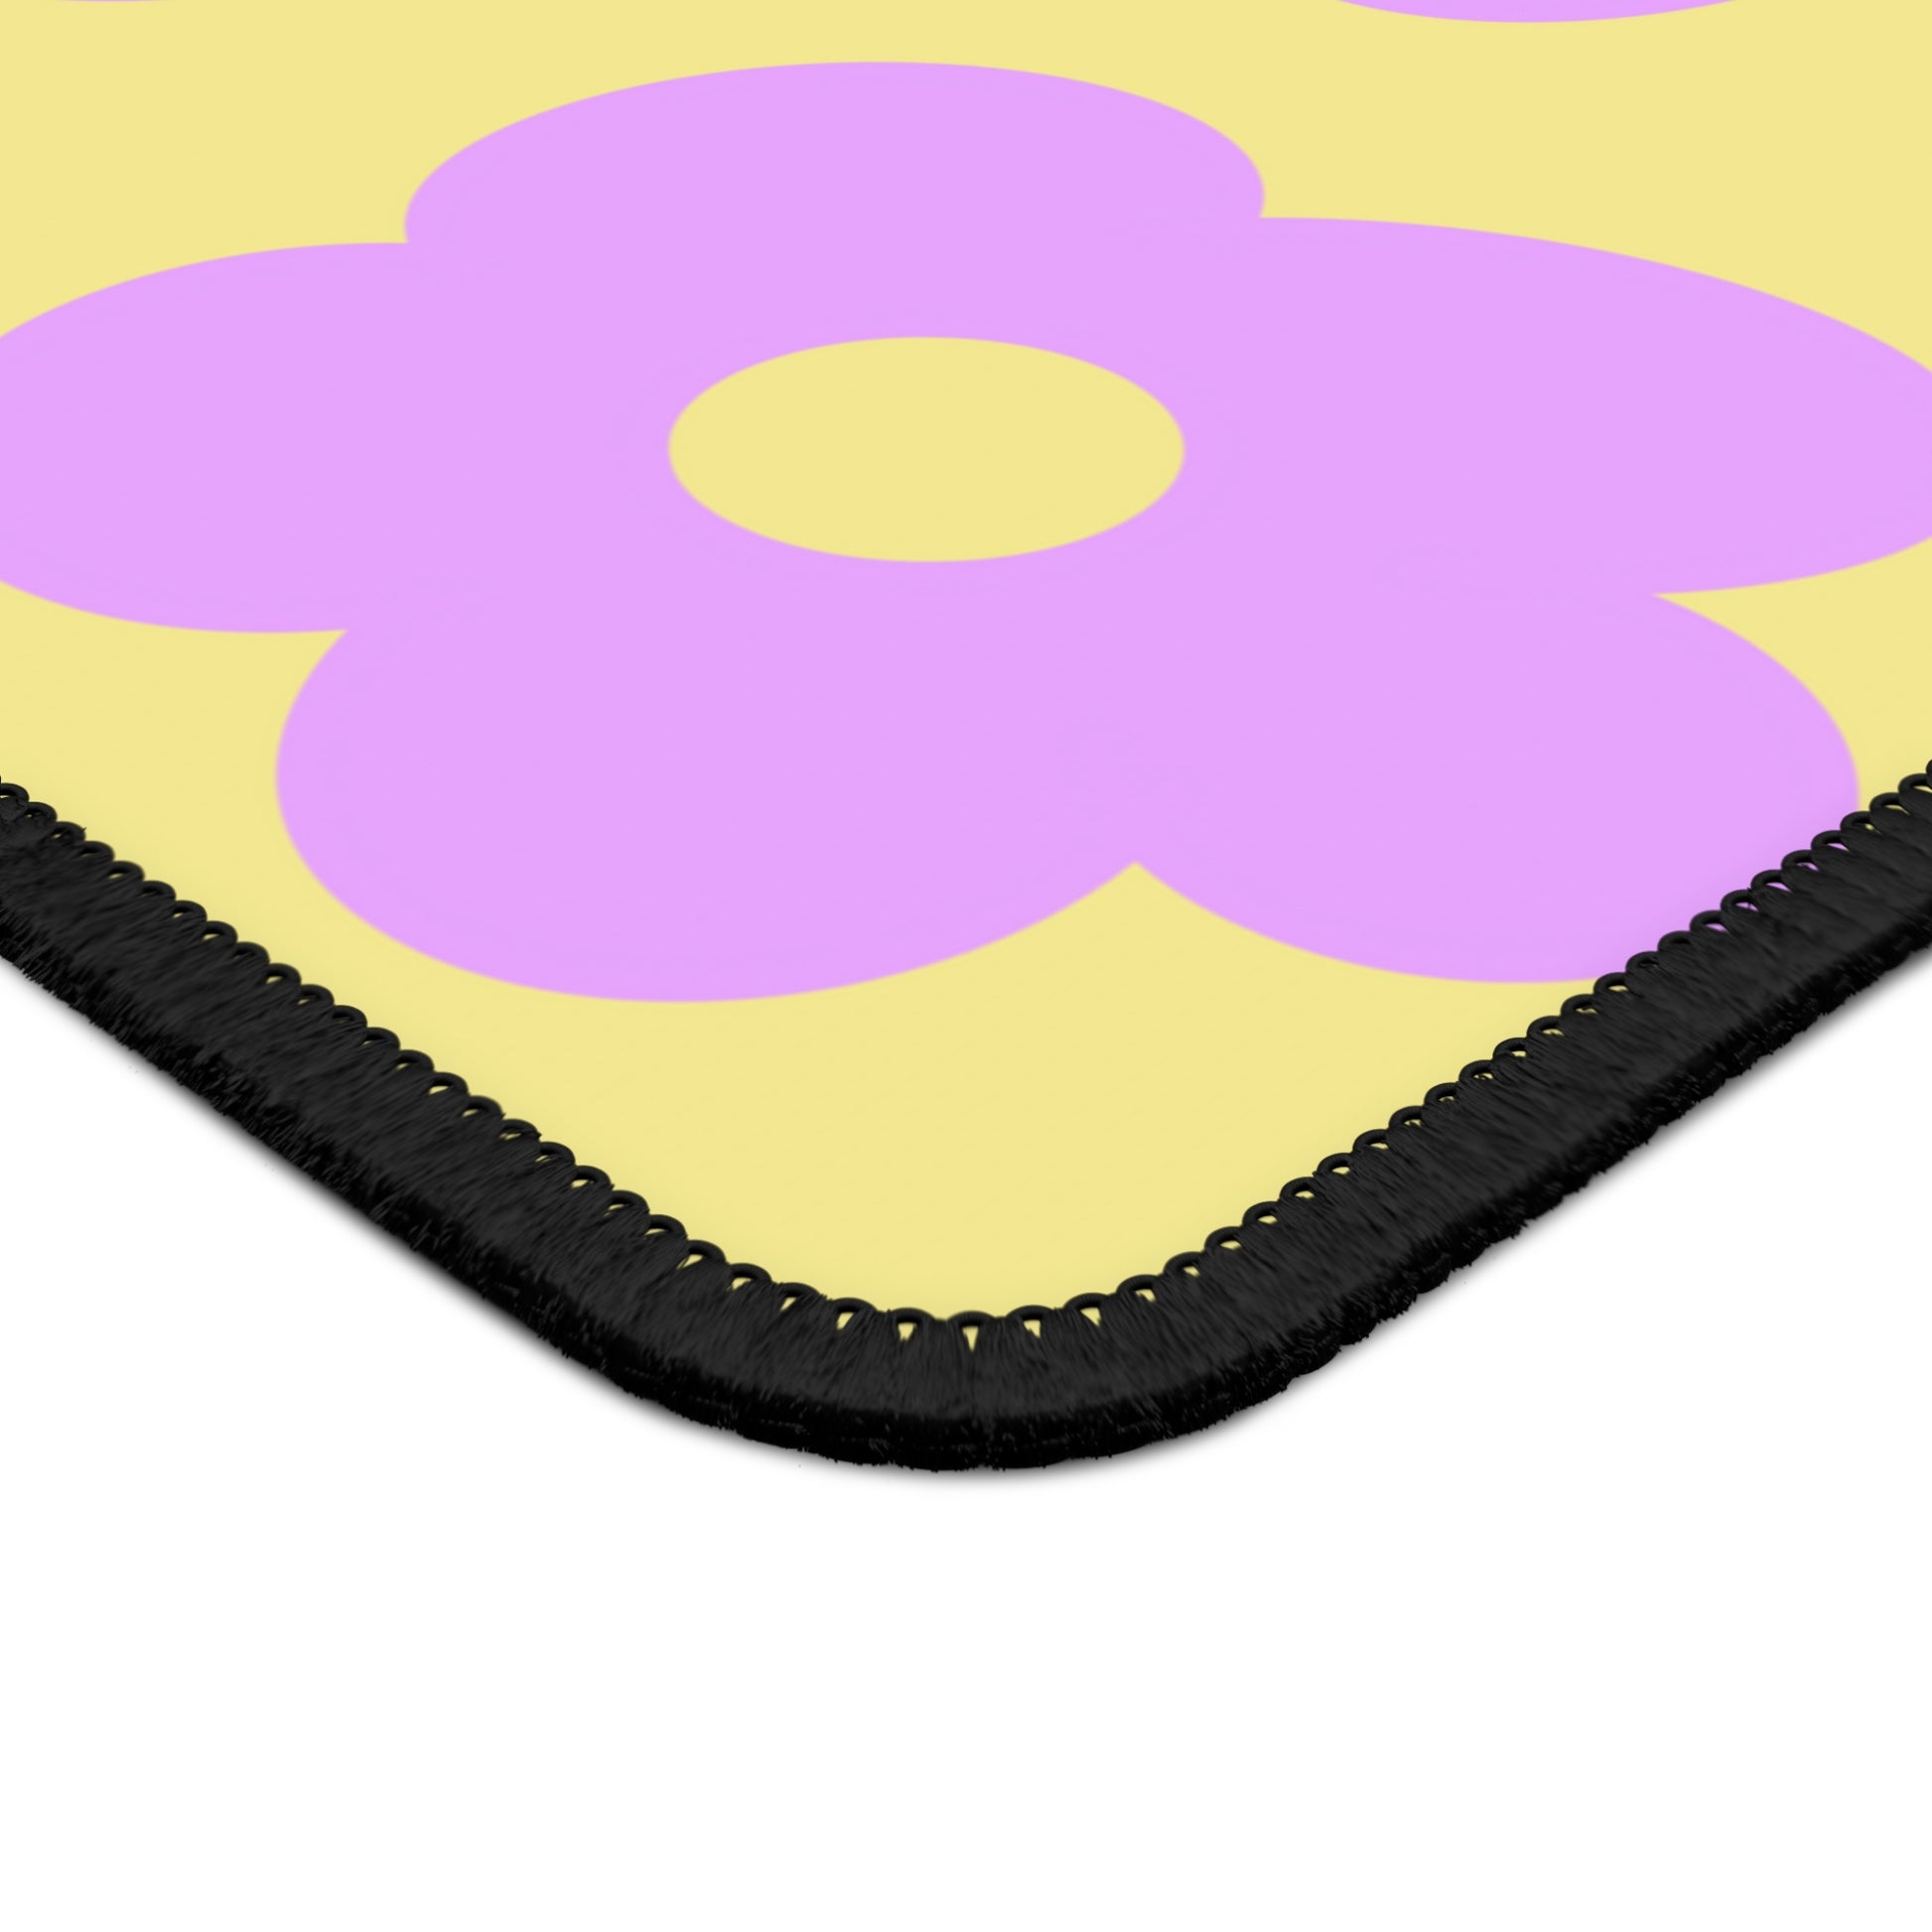 The corner of a gaming mouse pad with purple flowers on a yellow background.